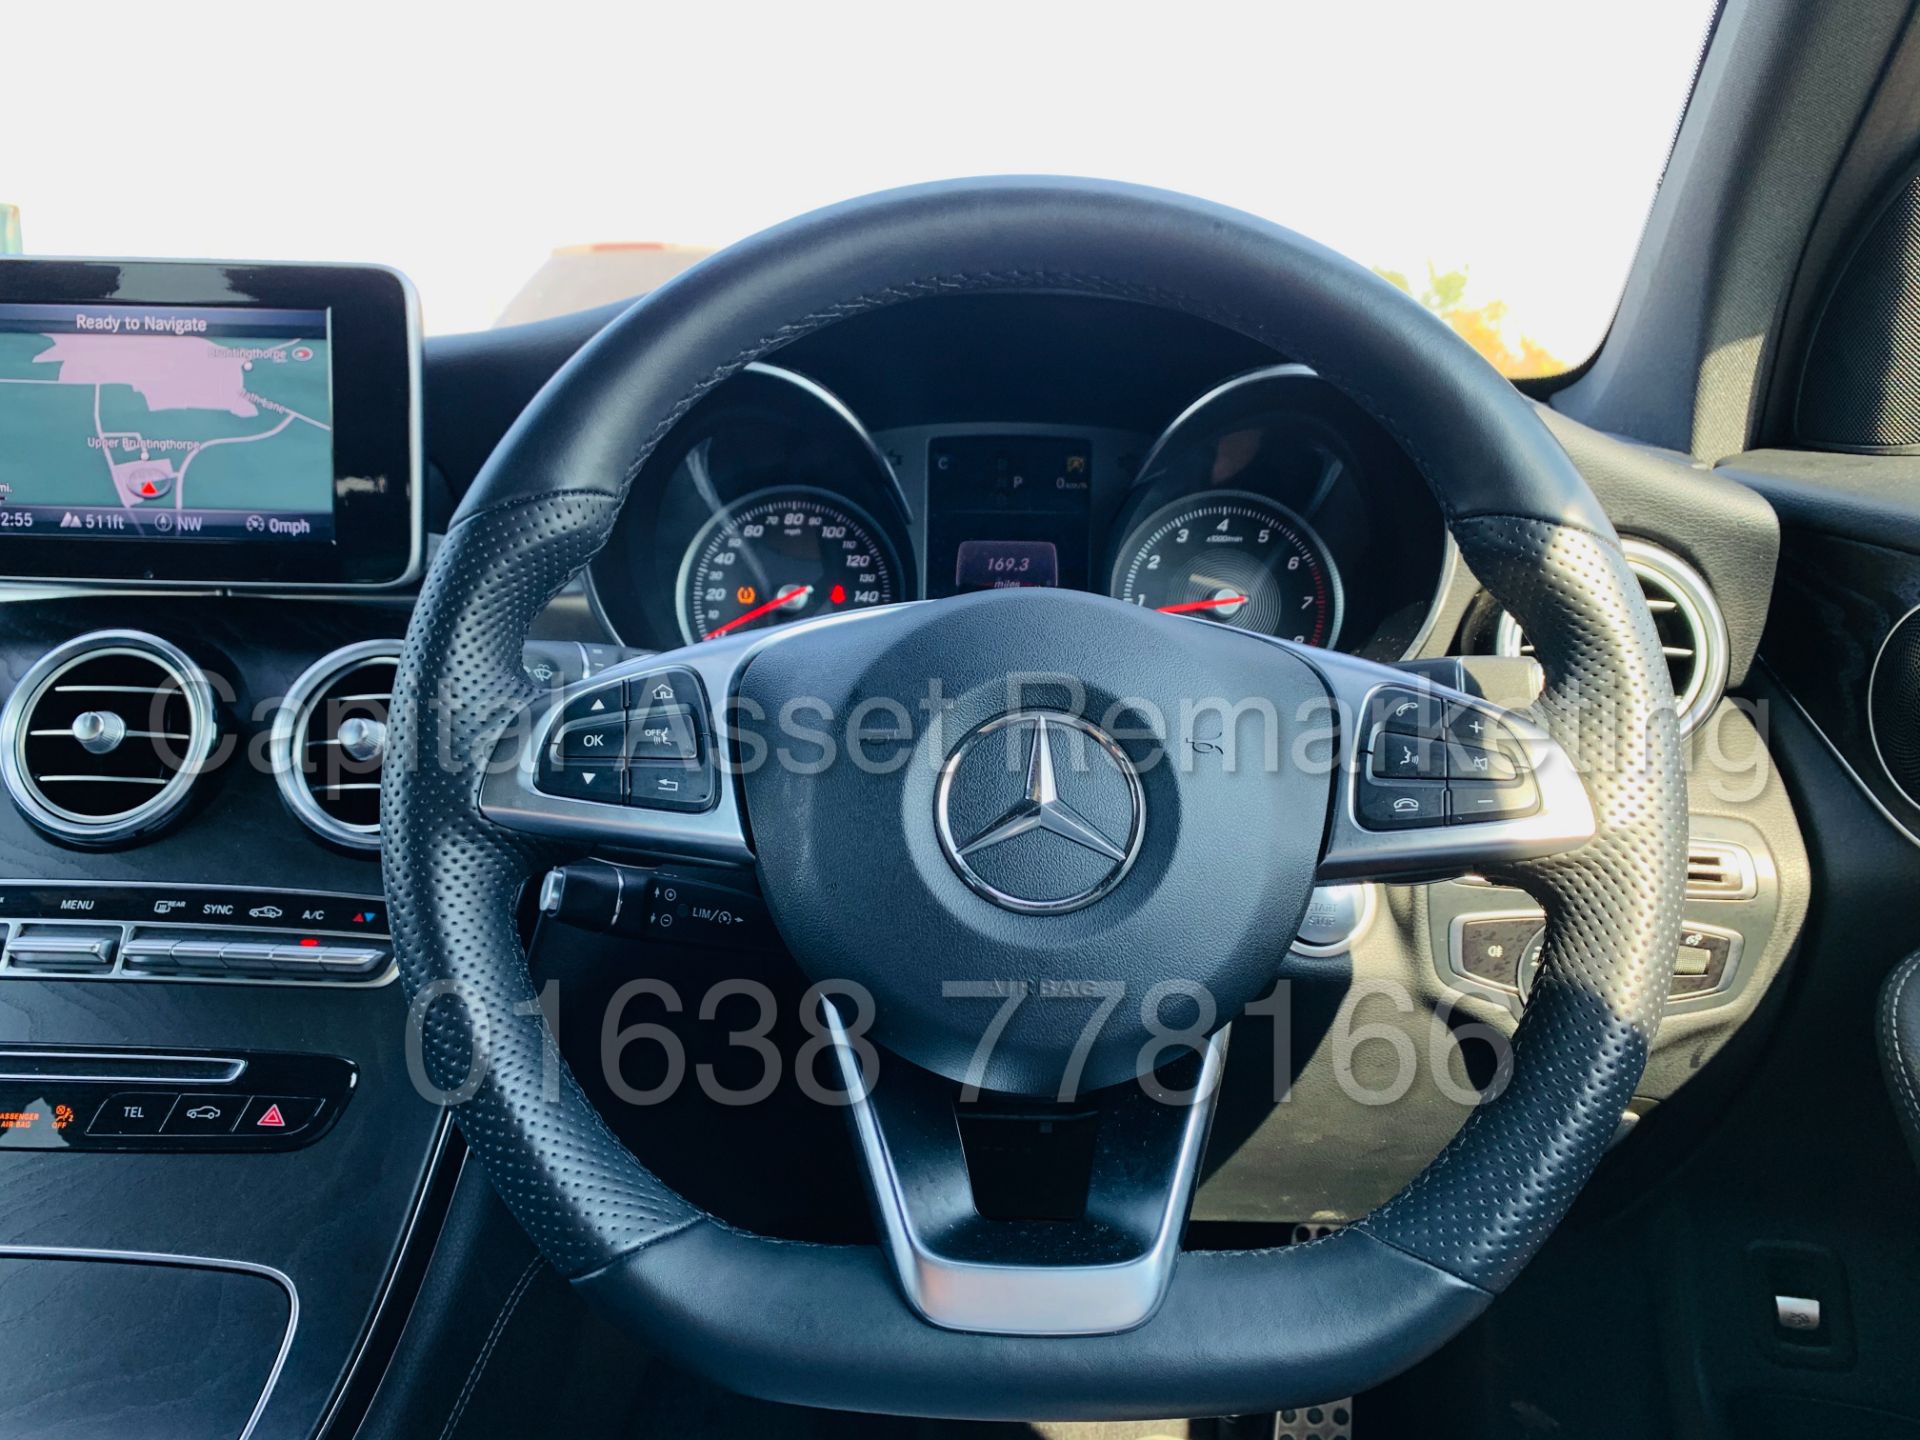 (On Sale) MERCEDES-BENZ GLC 250 *AMG - NIGHT EDITION* SUV (2019) '9G TRONIC - 4-MATIC' *HUGE SPEC* - Image 51 of 53